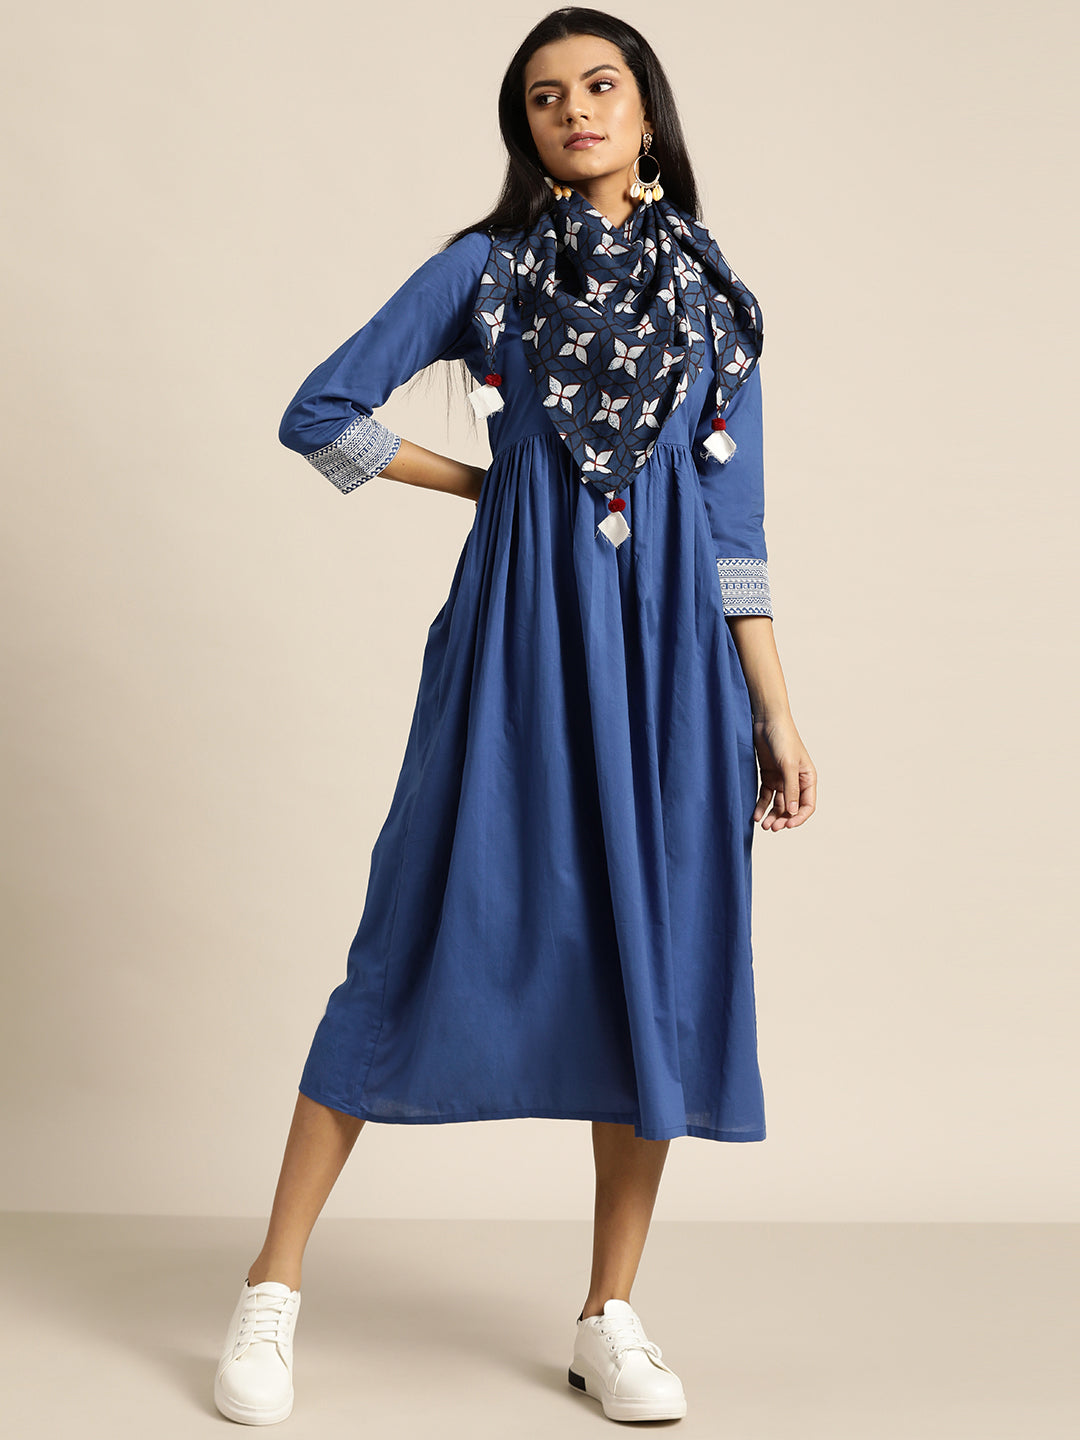 Royal Blue Cuff Embroidered Gathered Dress